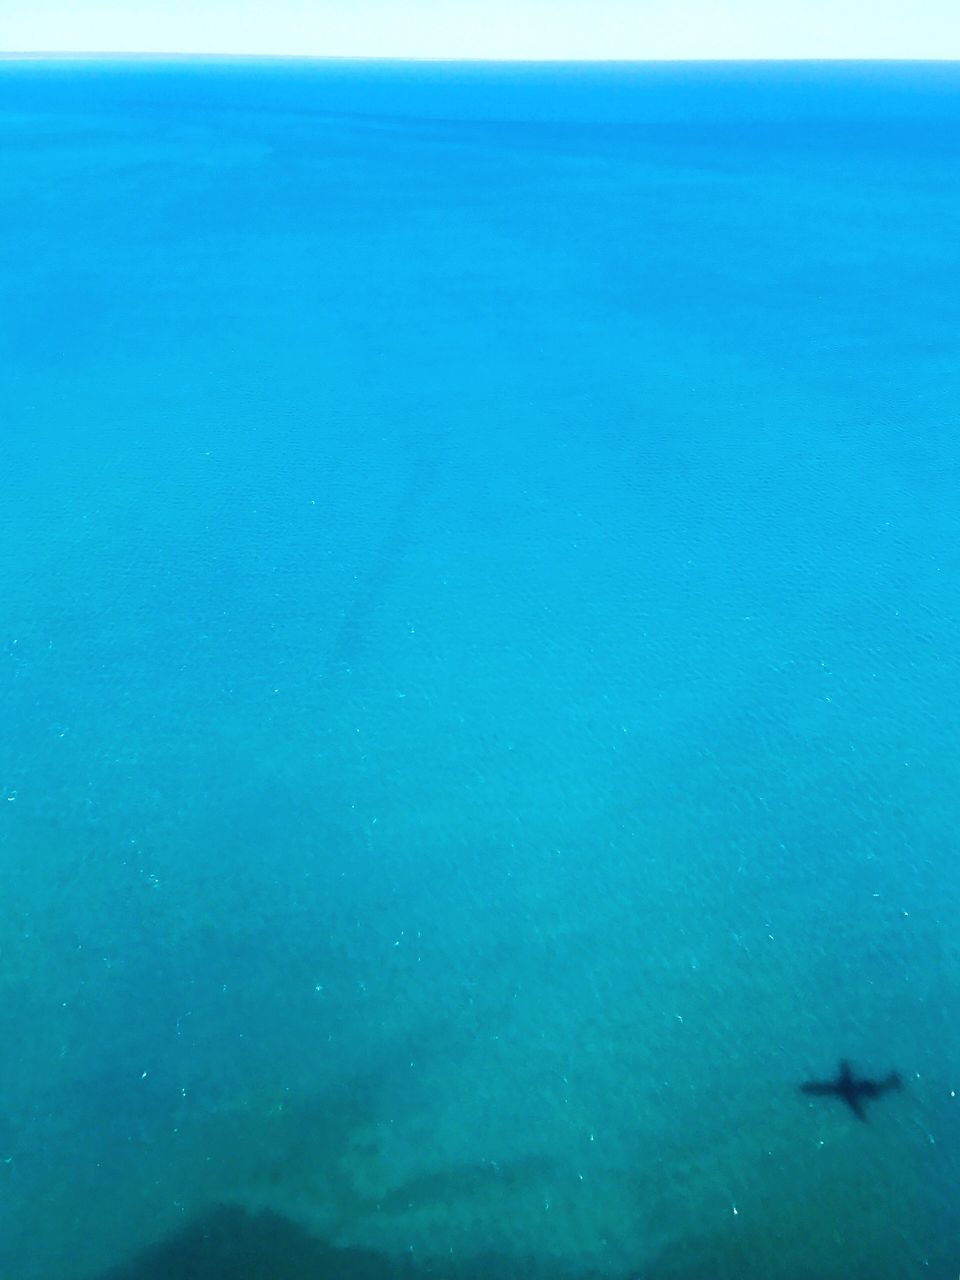 CLOSE-UP OF BLUE SEA AND AIRPLANE AGAINST SKY